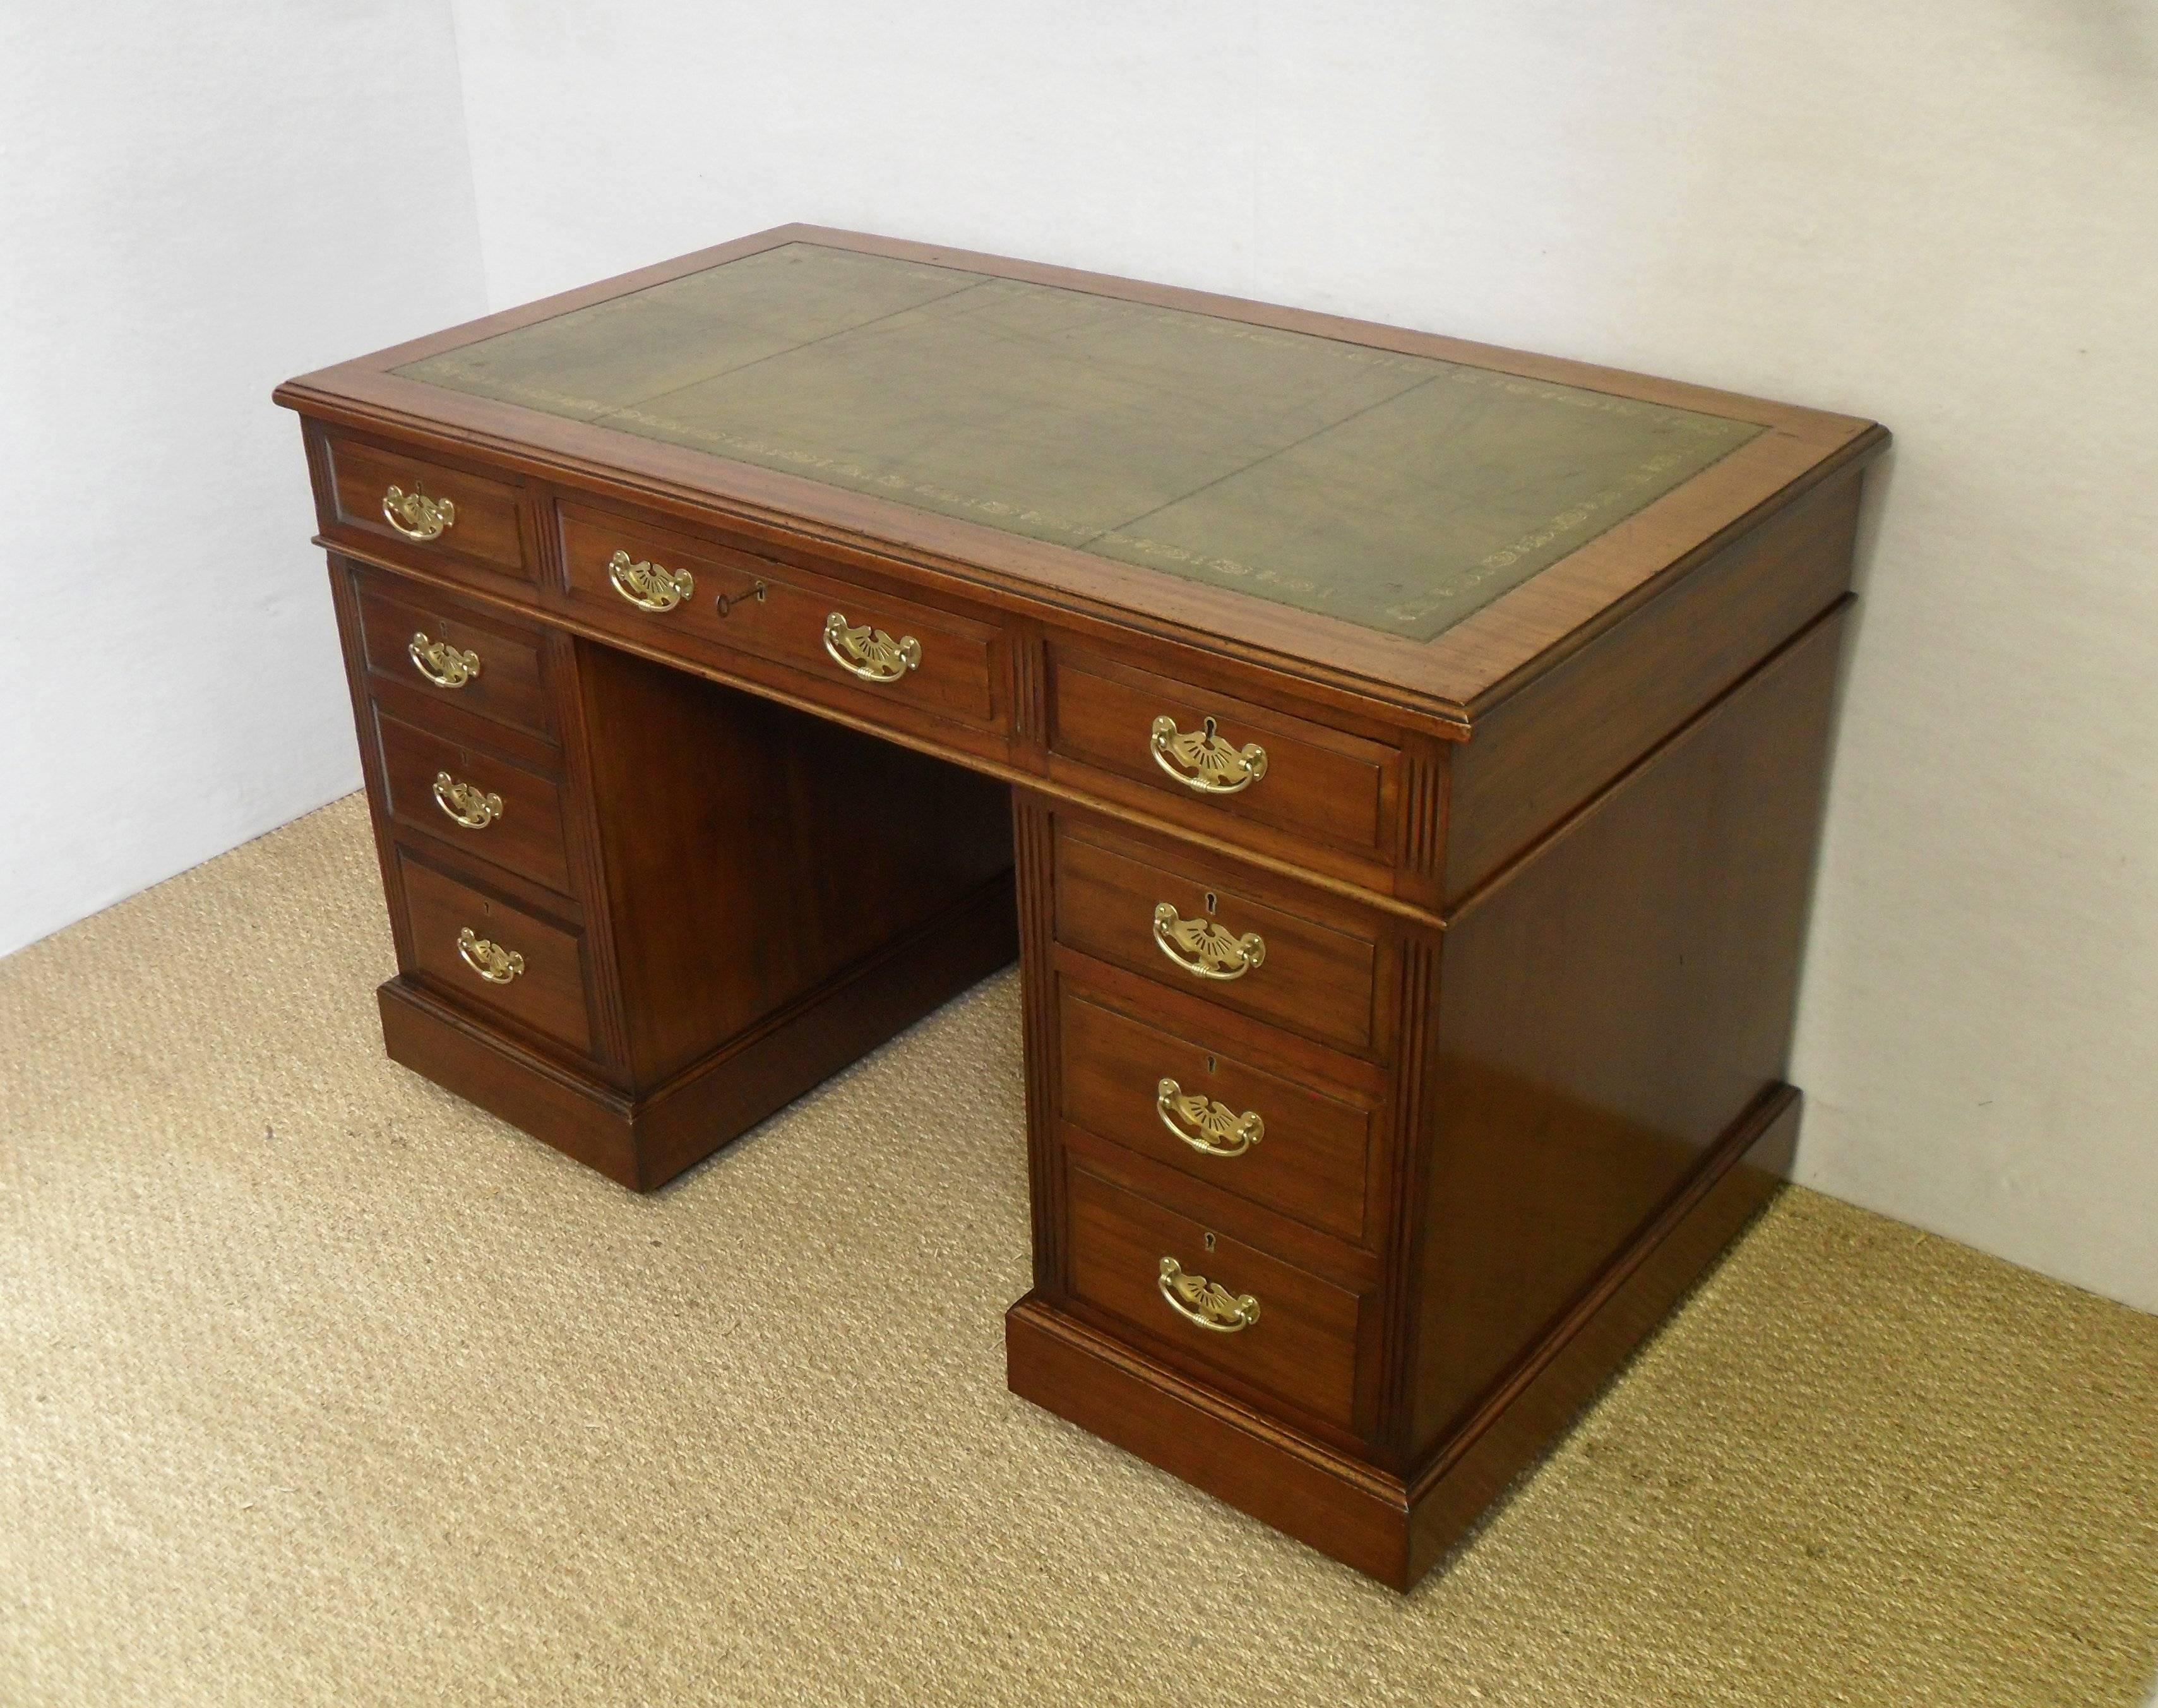 A very good quality late Victorian mahogany pedestal writing desk with chamfered drawer fronts and fluted decoration to the front. The desk has solid mahogany drawers and it is fitted with an inset green hide tooled gilded leather.
 
The desk is